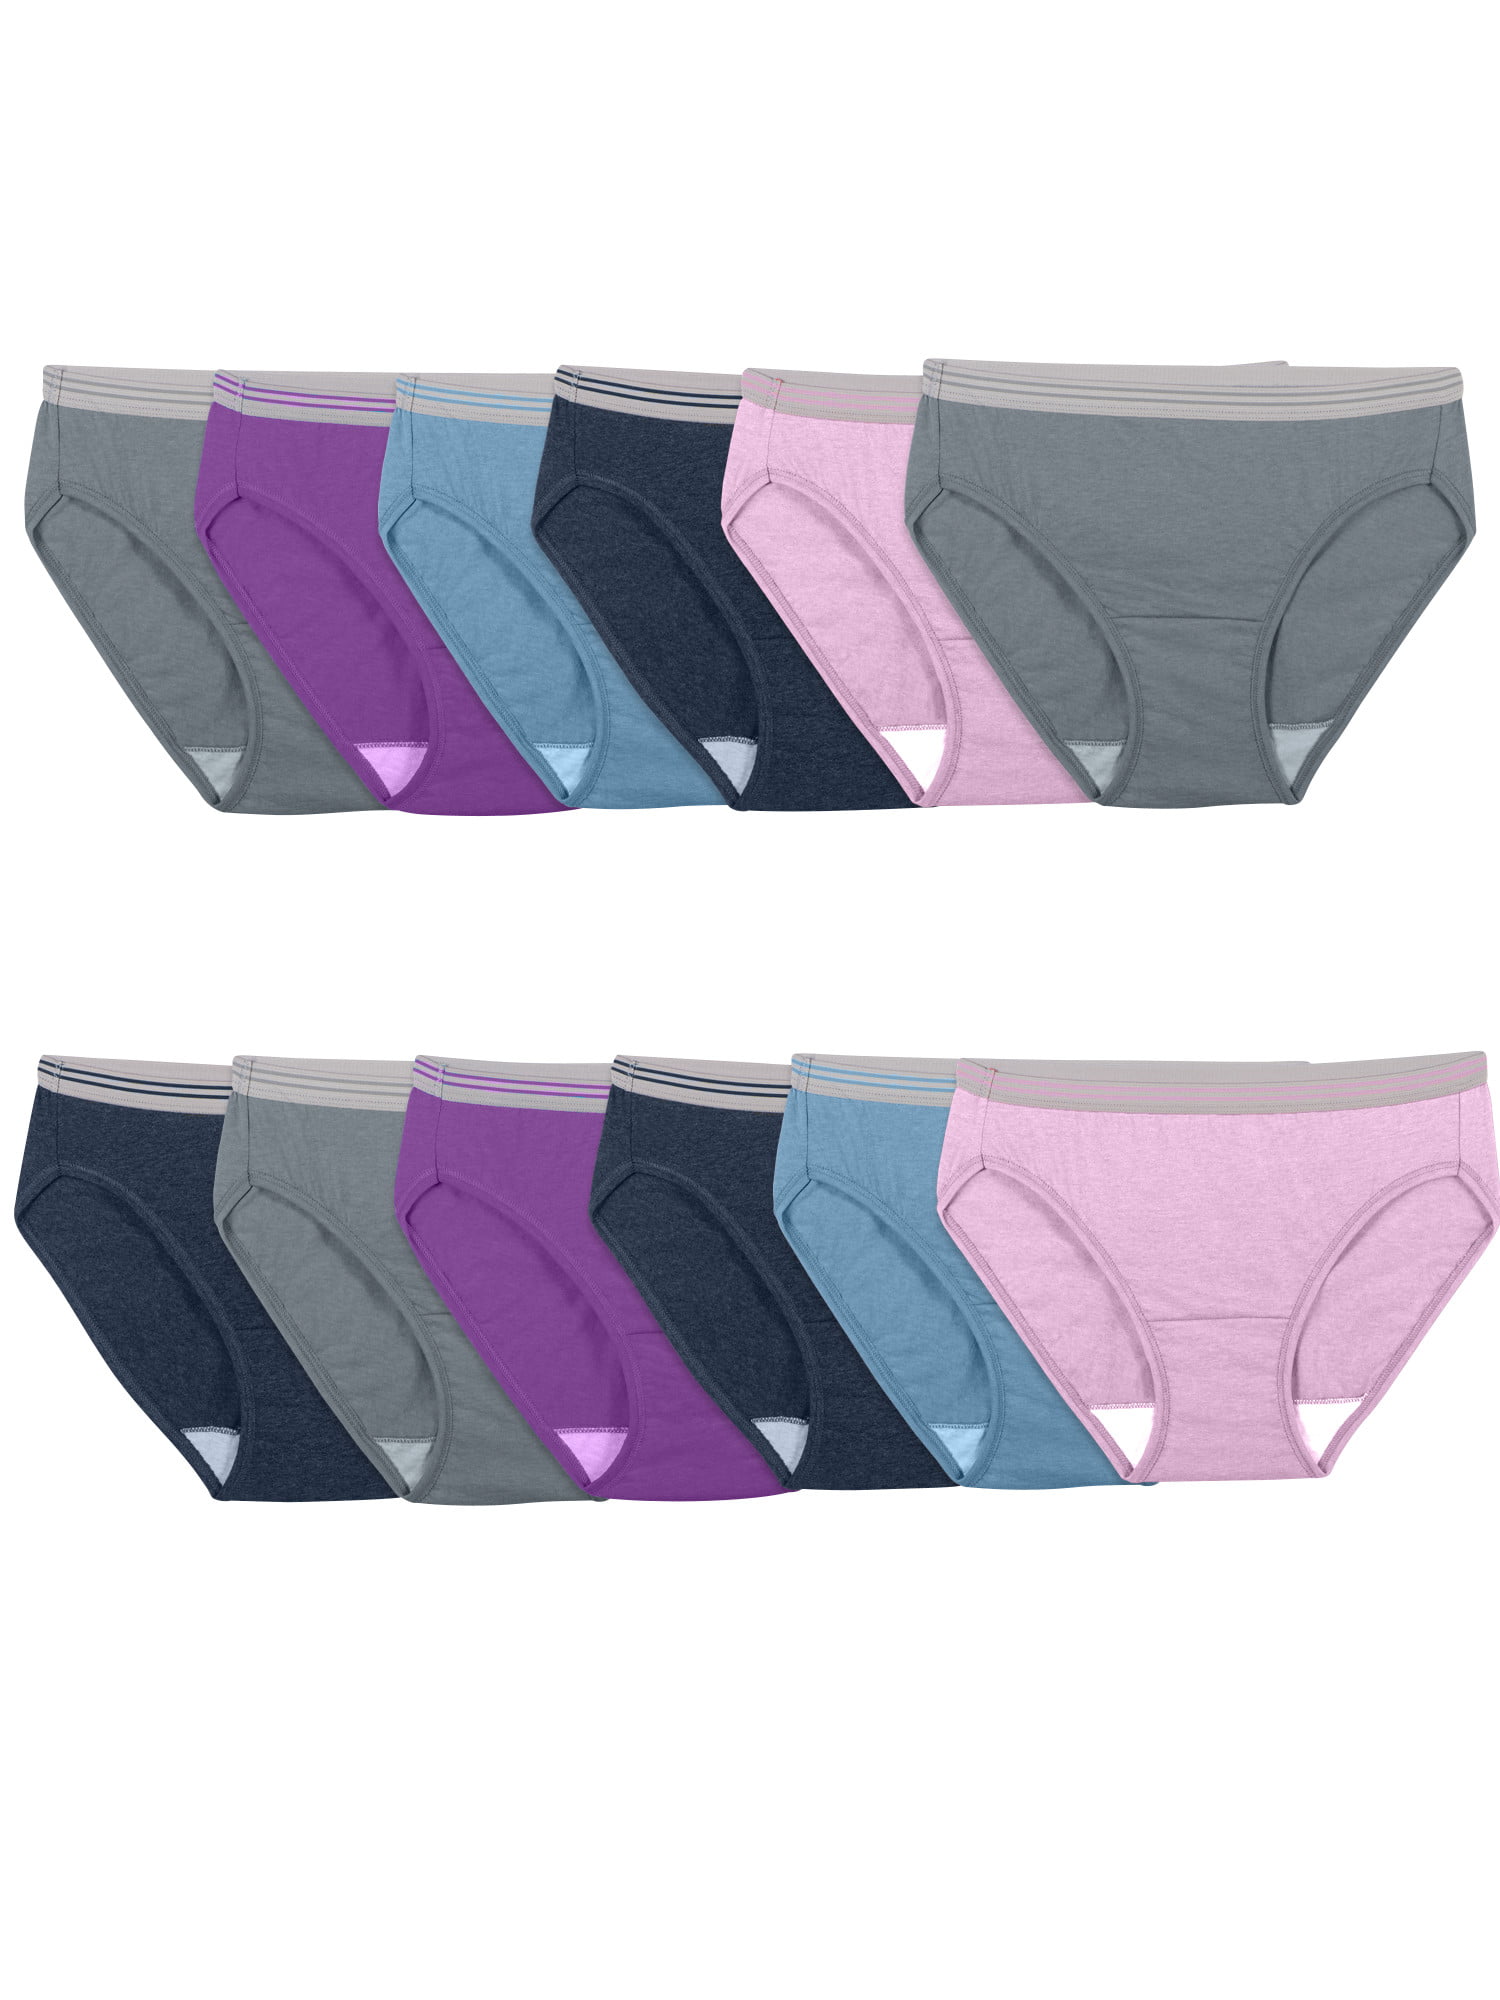 Fruit of the Loom Women's Heather Bikini Panties, 12-Pack Best Deals and  Price History at